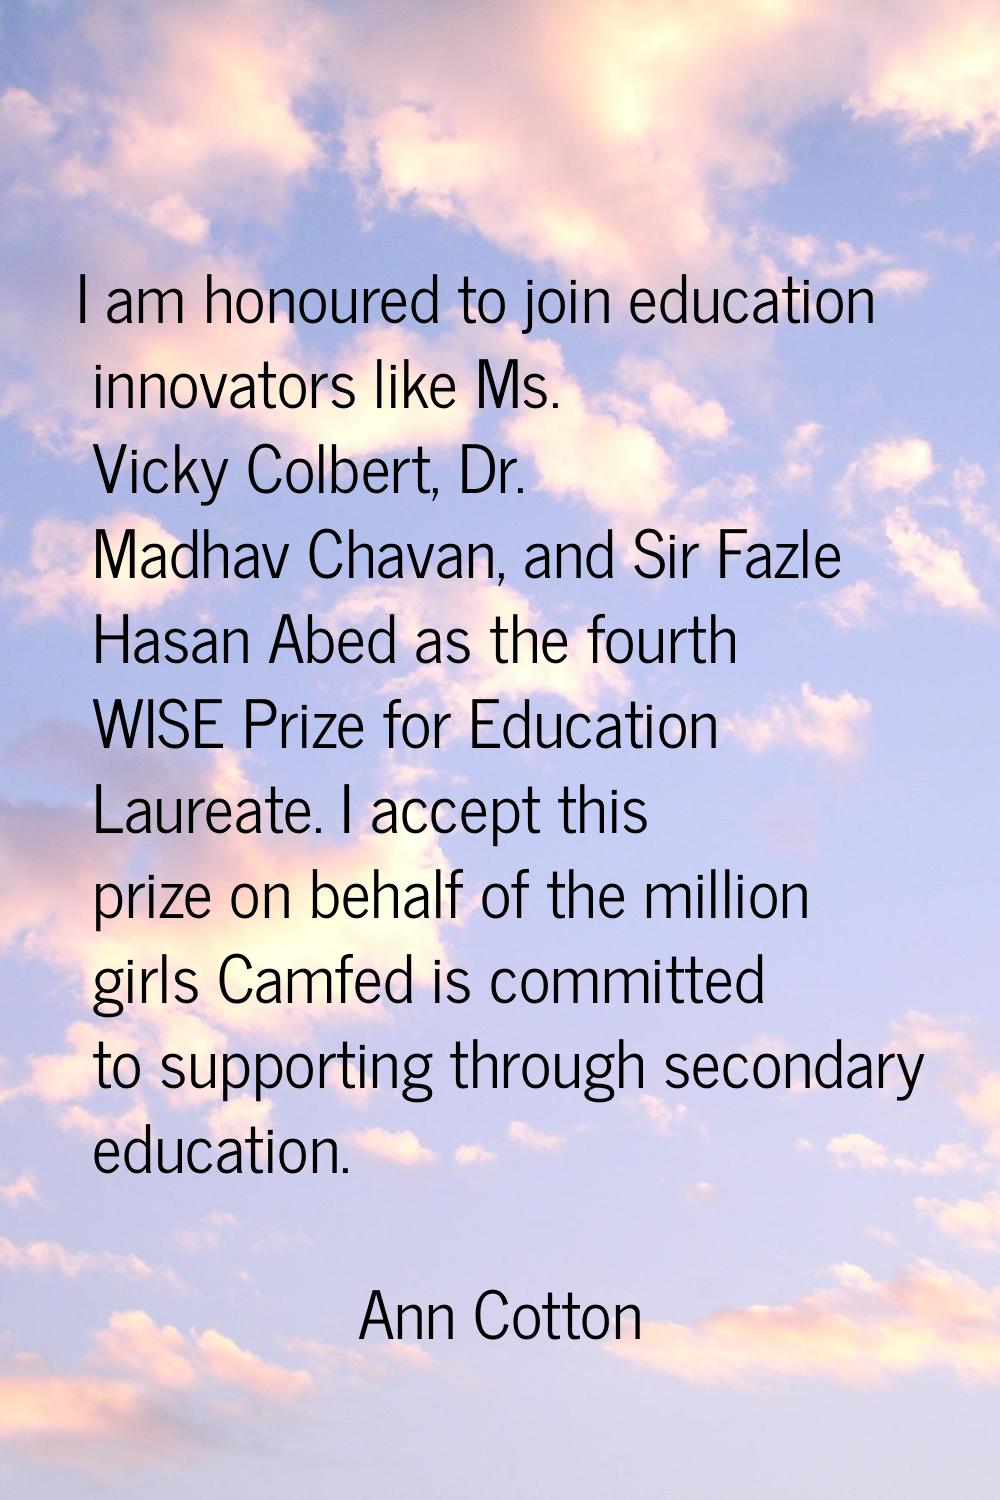 I am honoured to join education innovators like Ms. Vicky Colbert, Dr. Madhav Chavan, and Sir Fazle